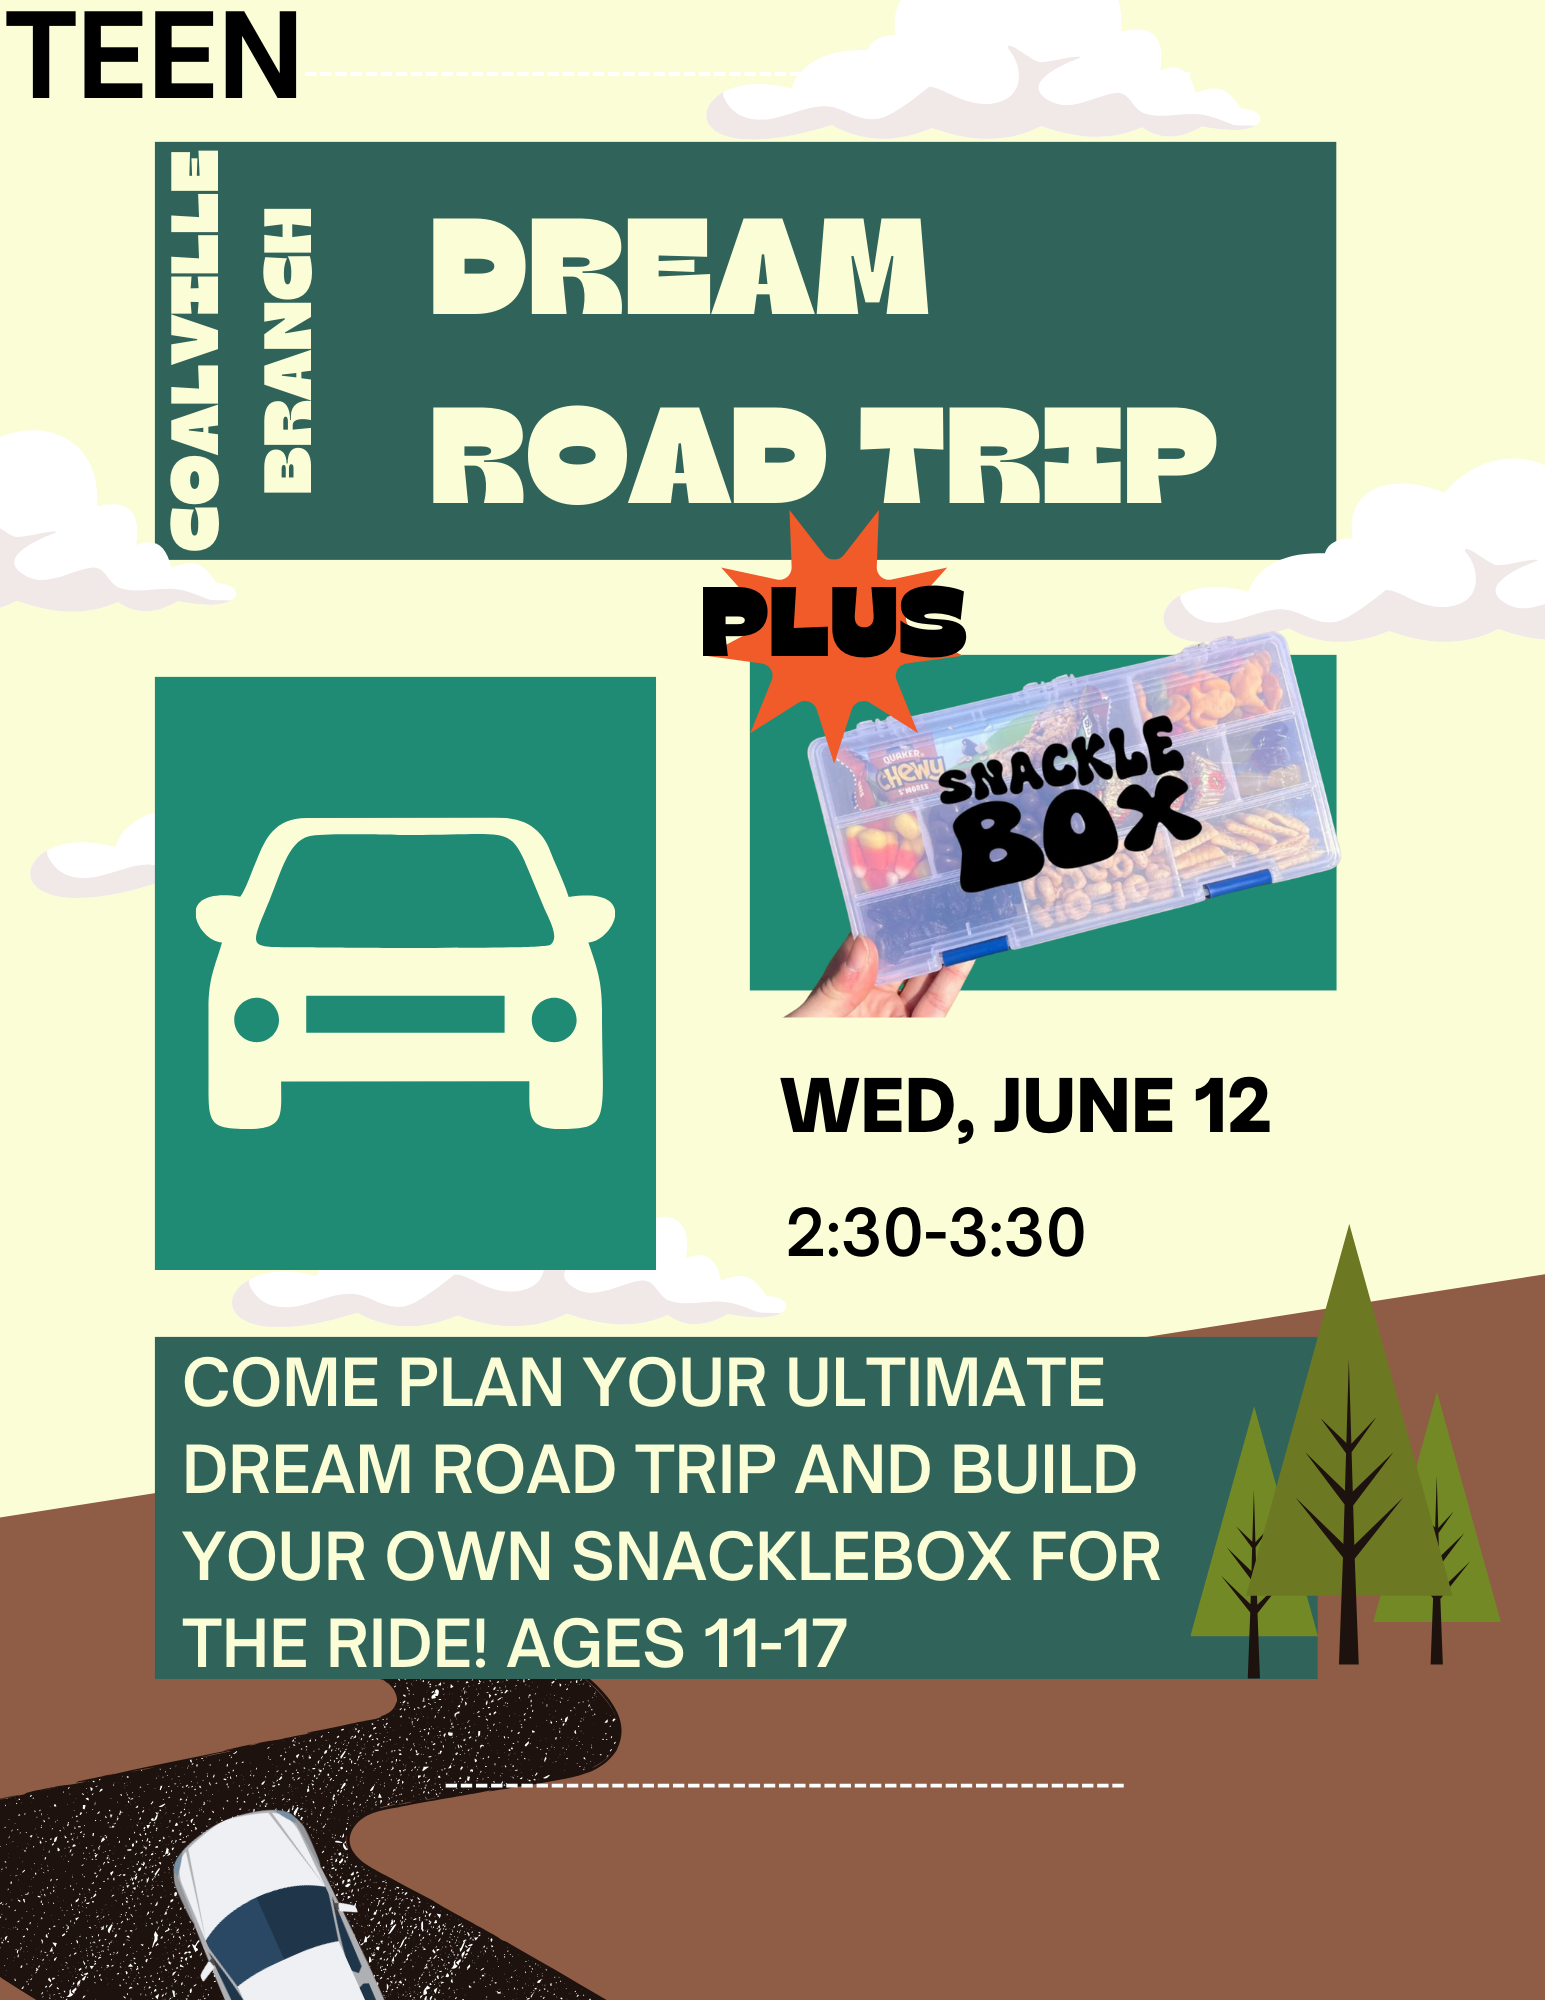 Teen Dream Road Trips & Snackleboxes at Coalville